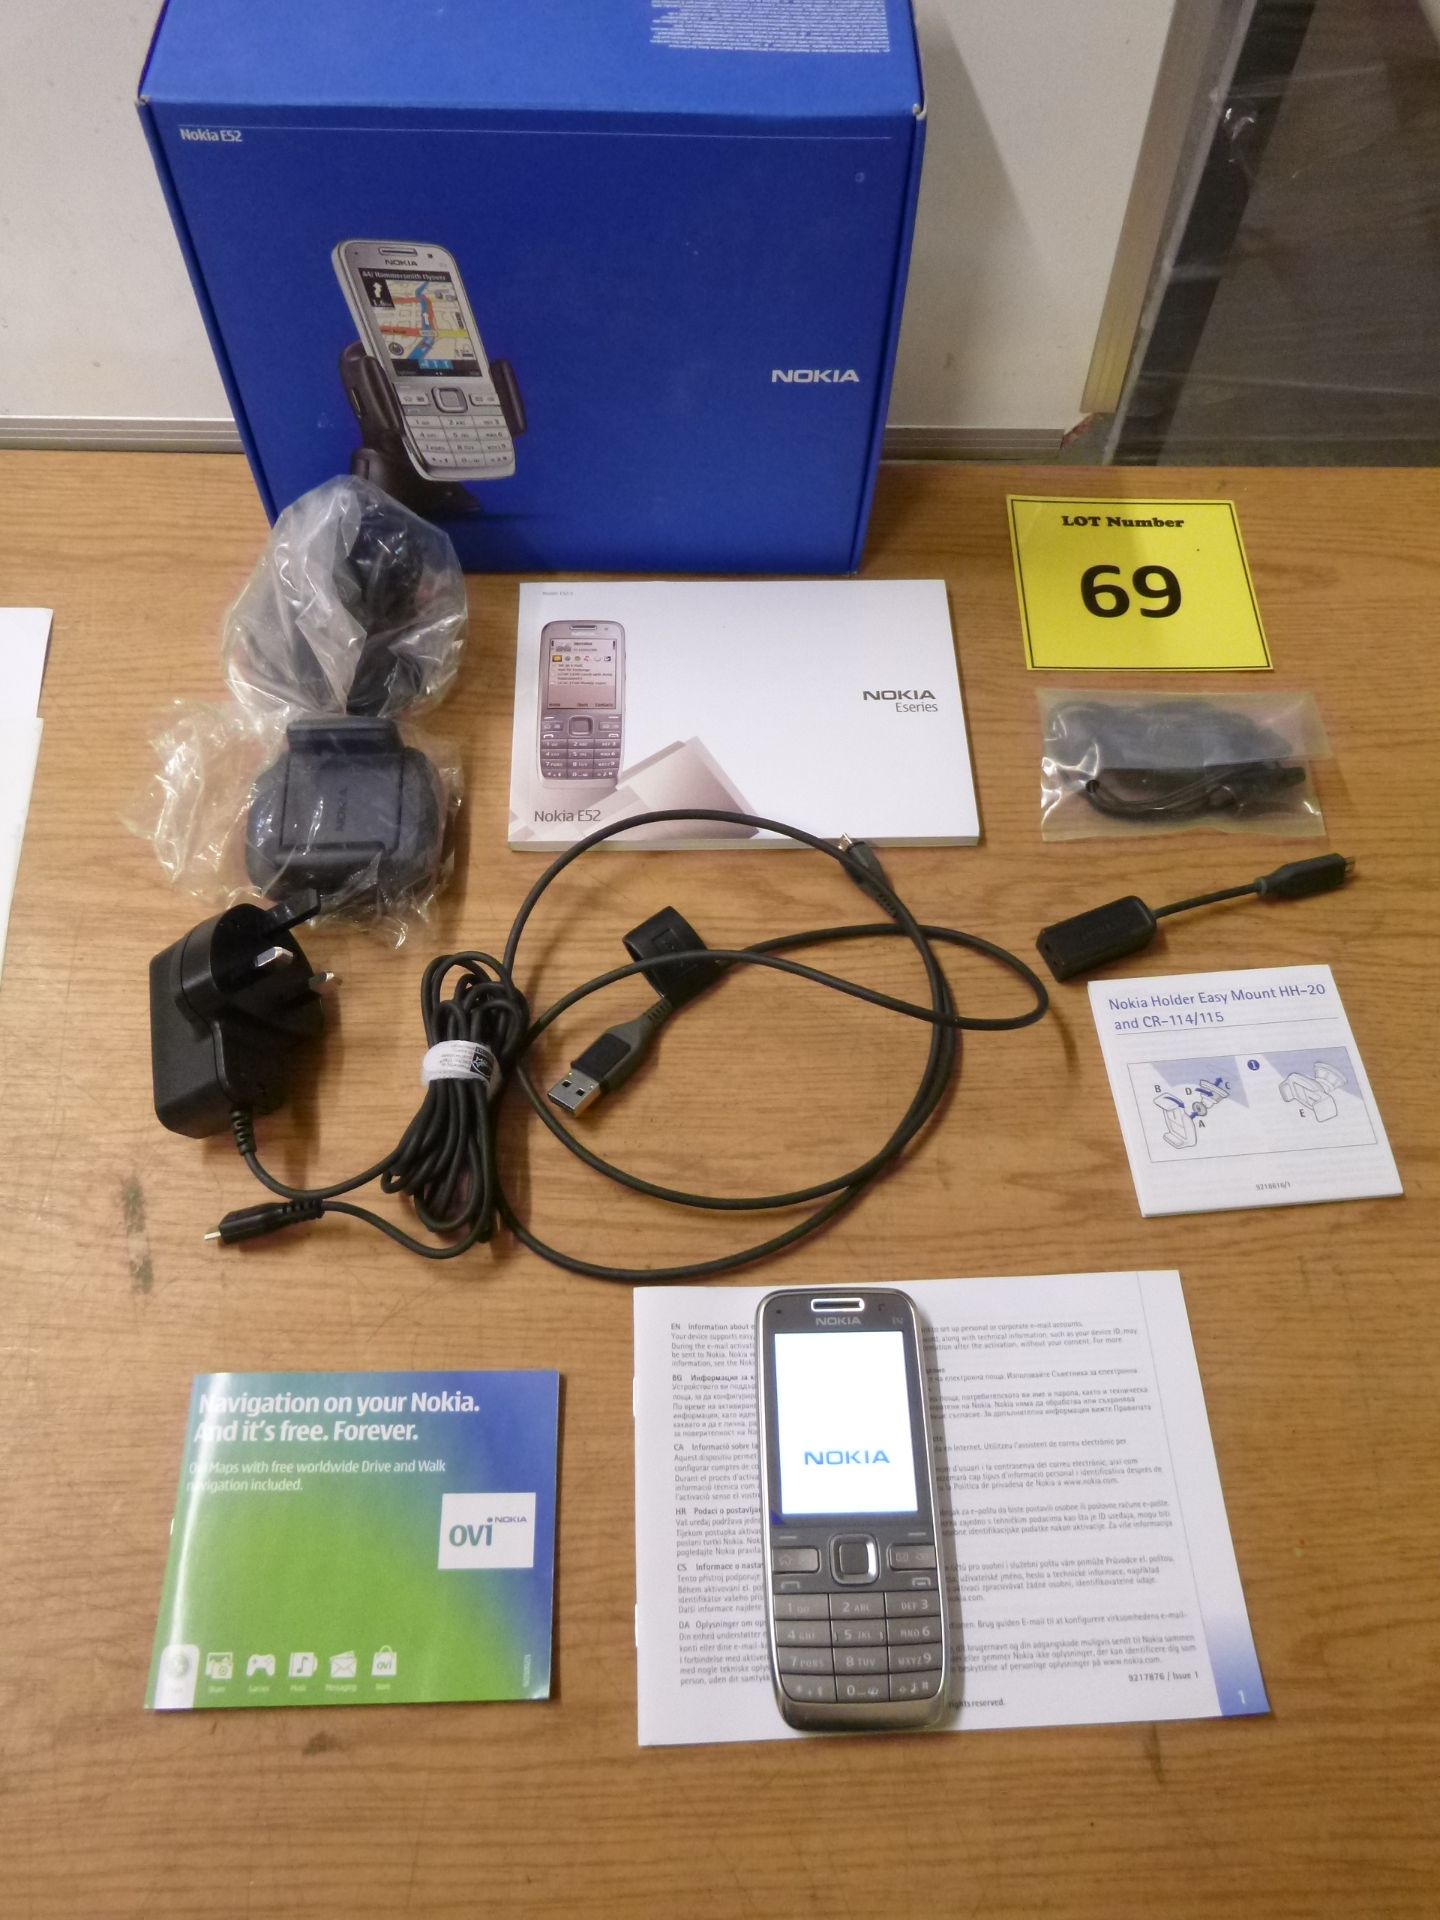 NOKIA E52-1 Metal VERSION MANUFACTURED IN FINLAND. BOXED WITH CHARGER, EARPHONES, CABLES,